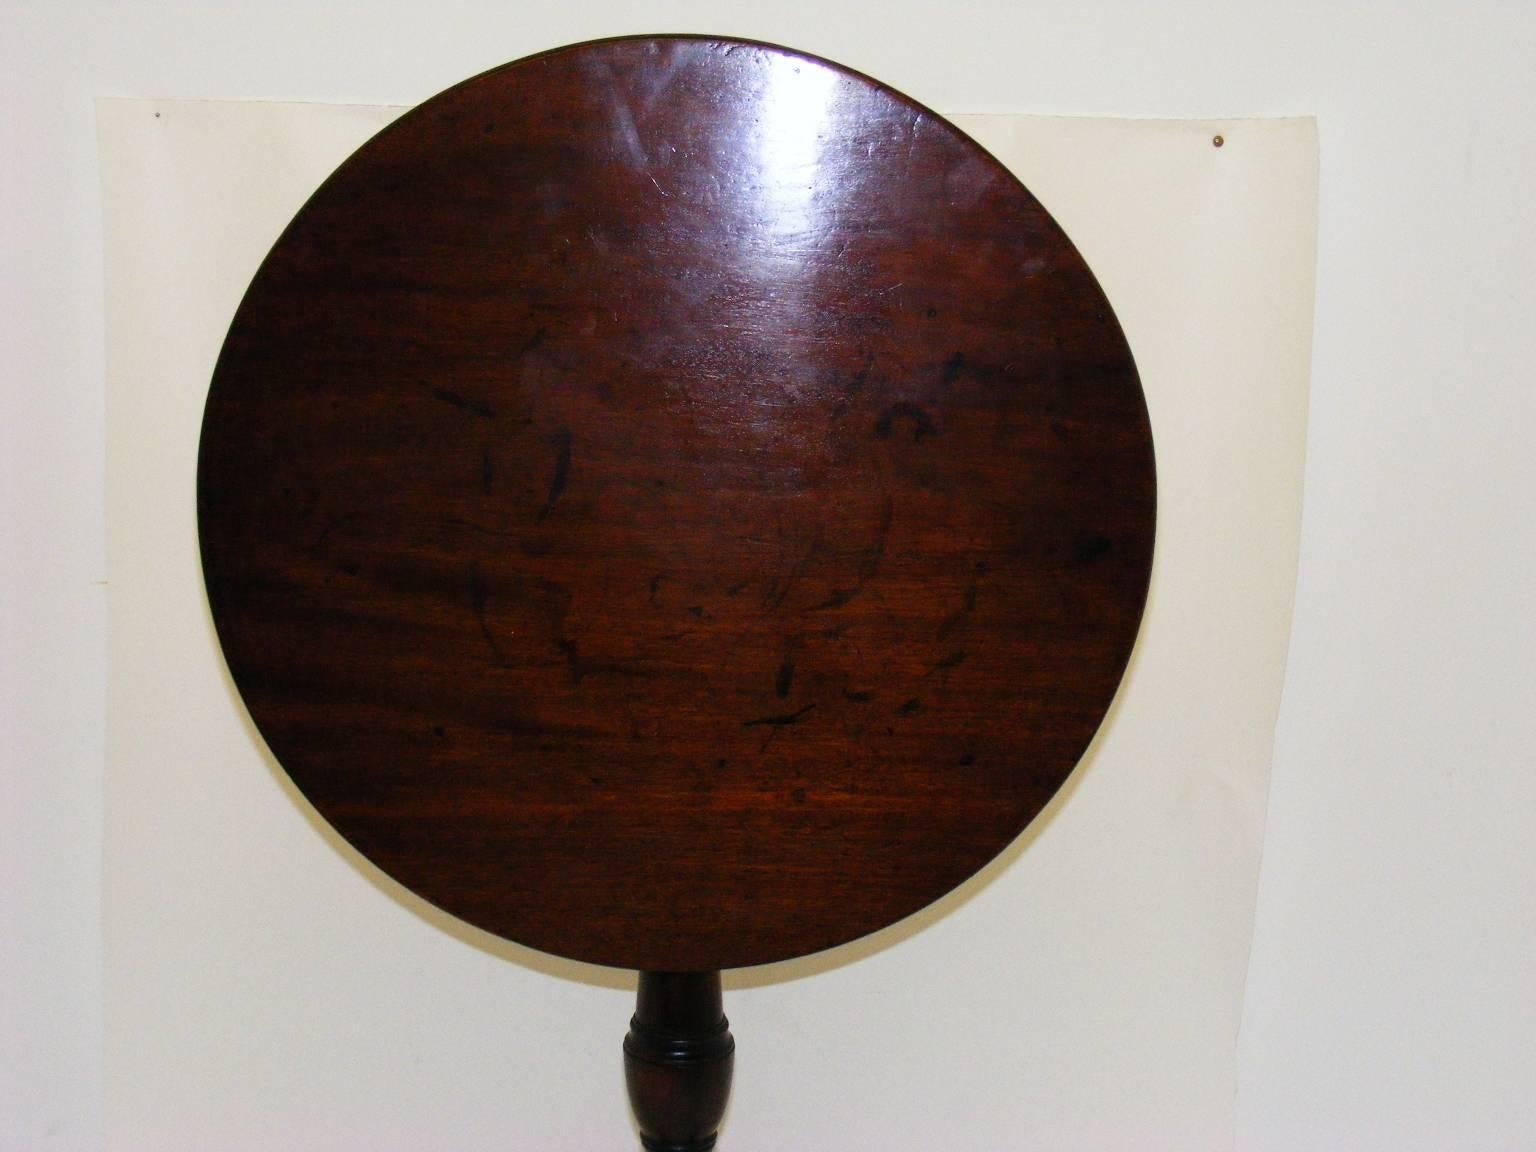 This is a lovely example of a small Georgian tilt-top table in fine untouched original condition. The top, which is made from rich warm grain mahogany with good patina, is mounted on a elegantly shaped column with tripod legs and slipper